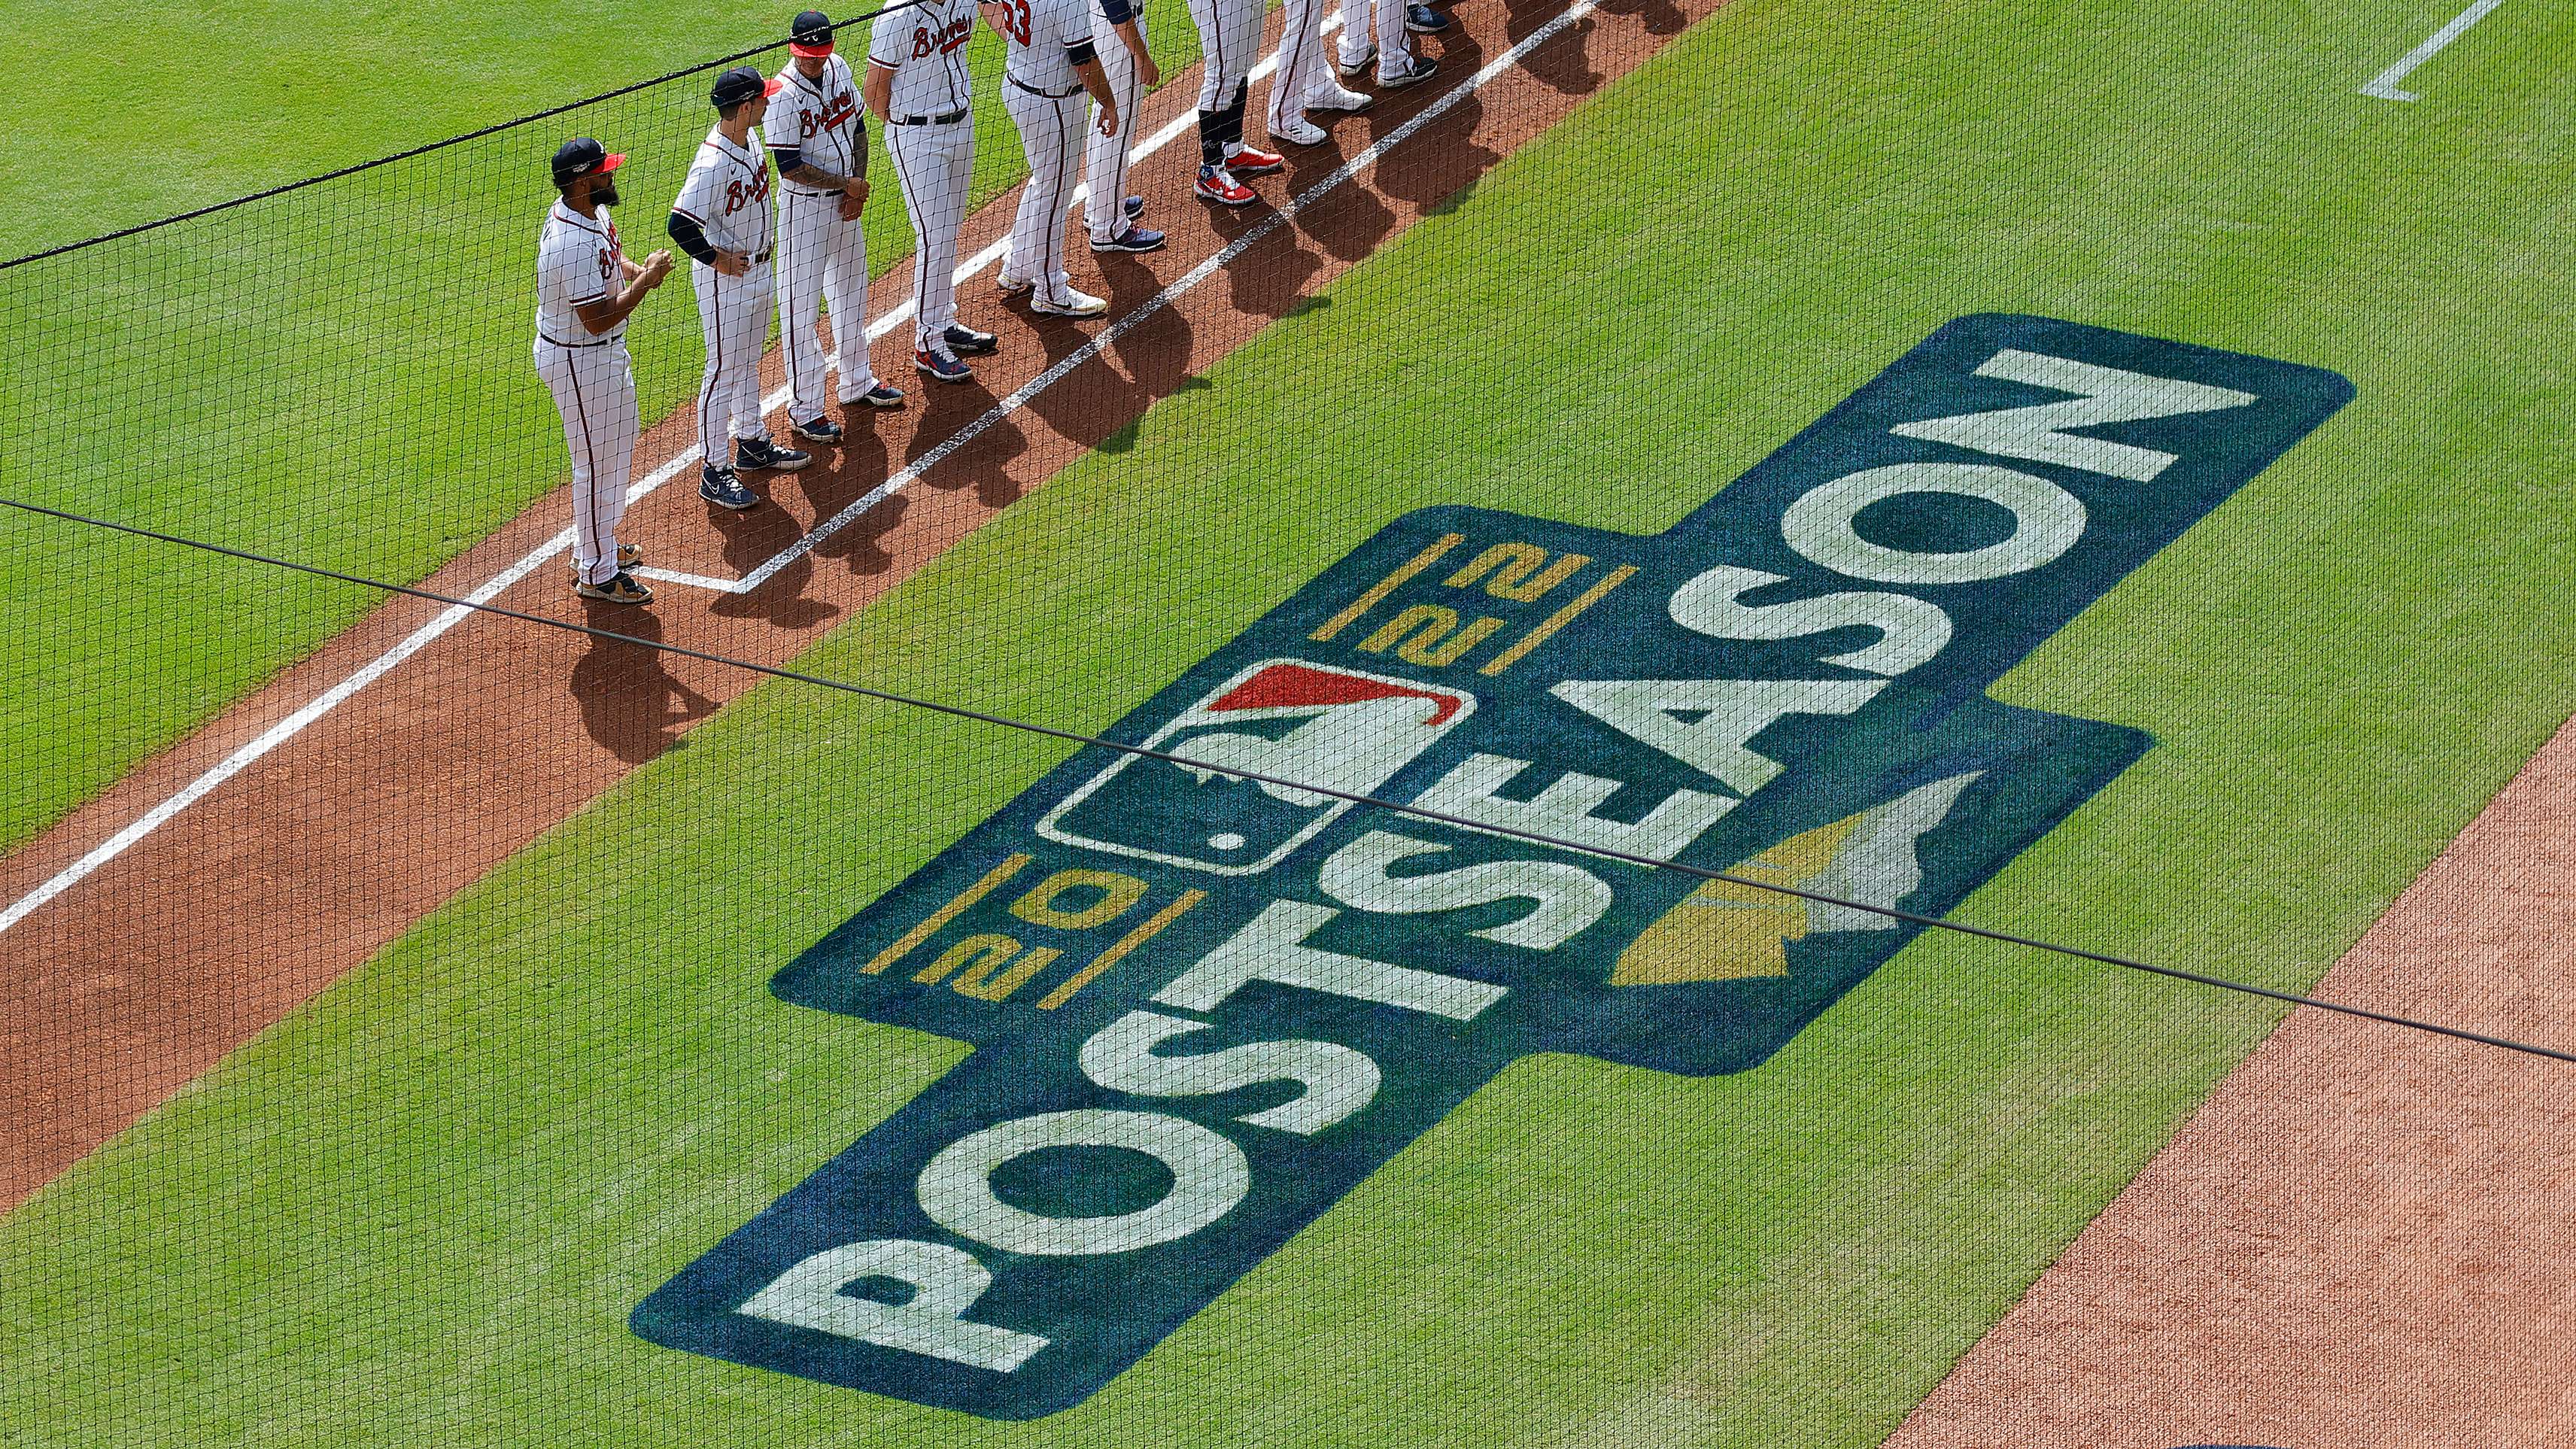 2023 MLB postseason dates: Dodgers primed to benefit from NLDS schedule? 